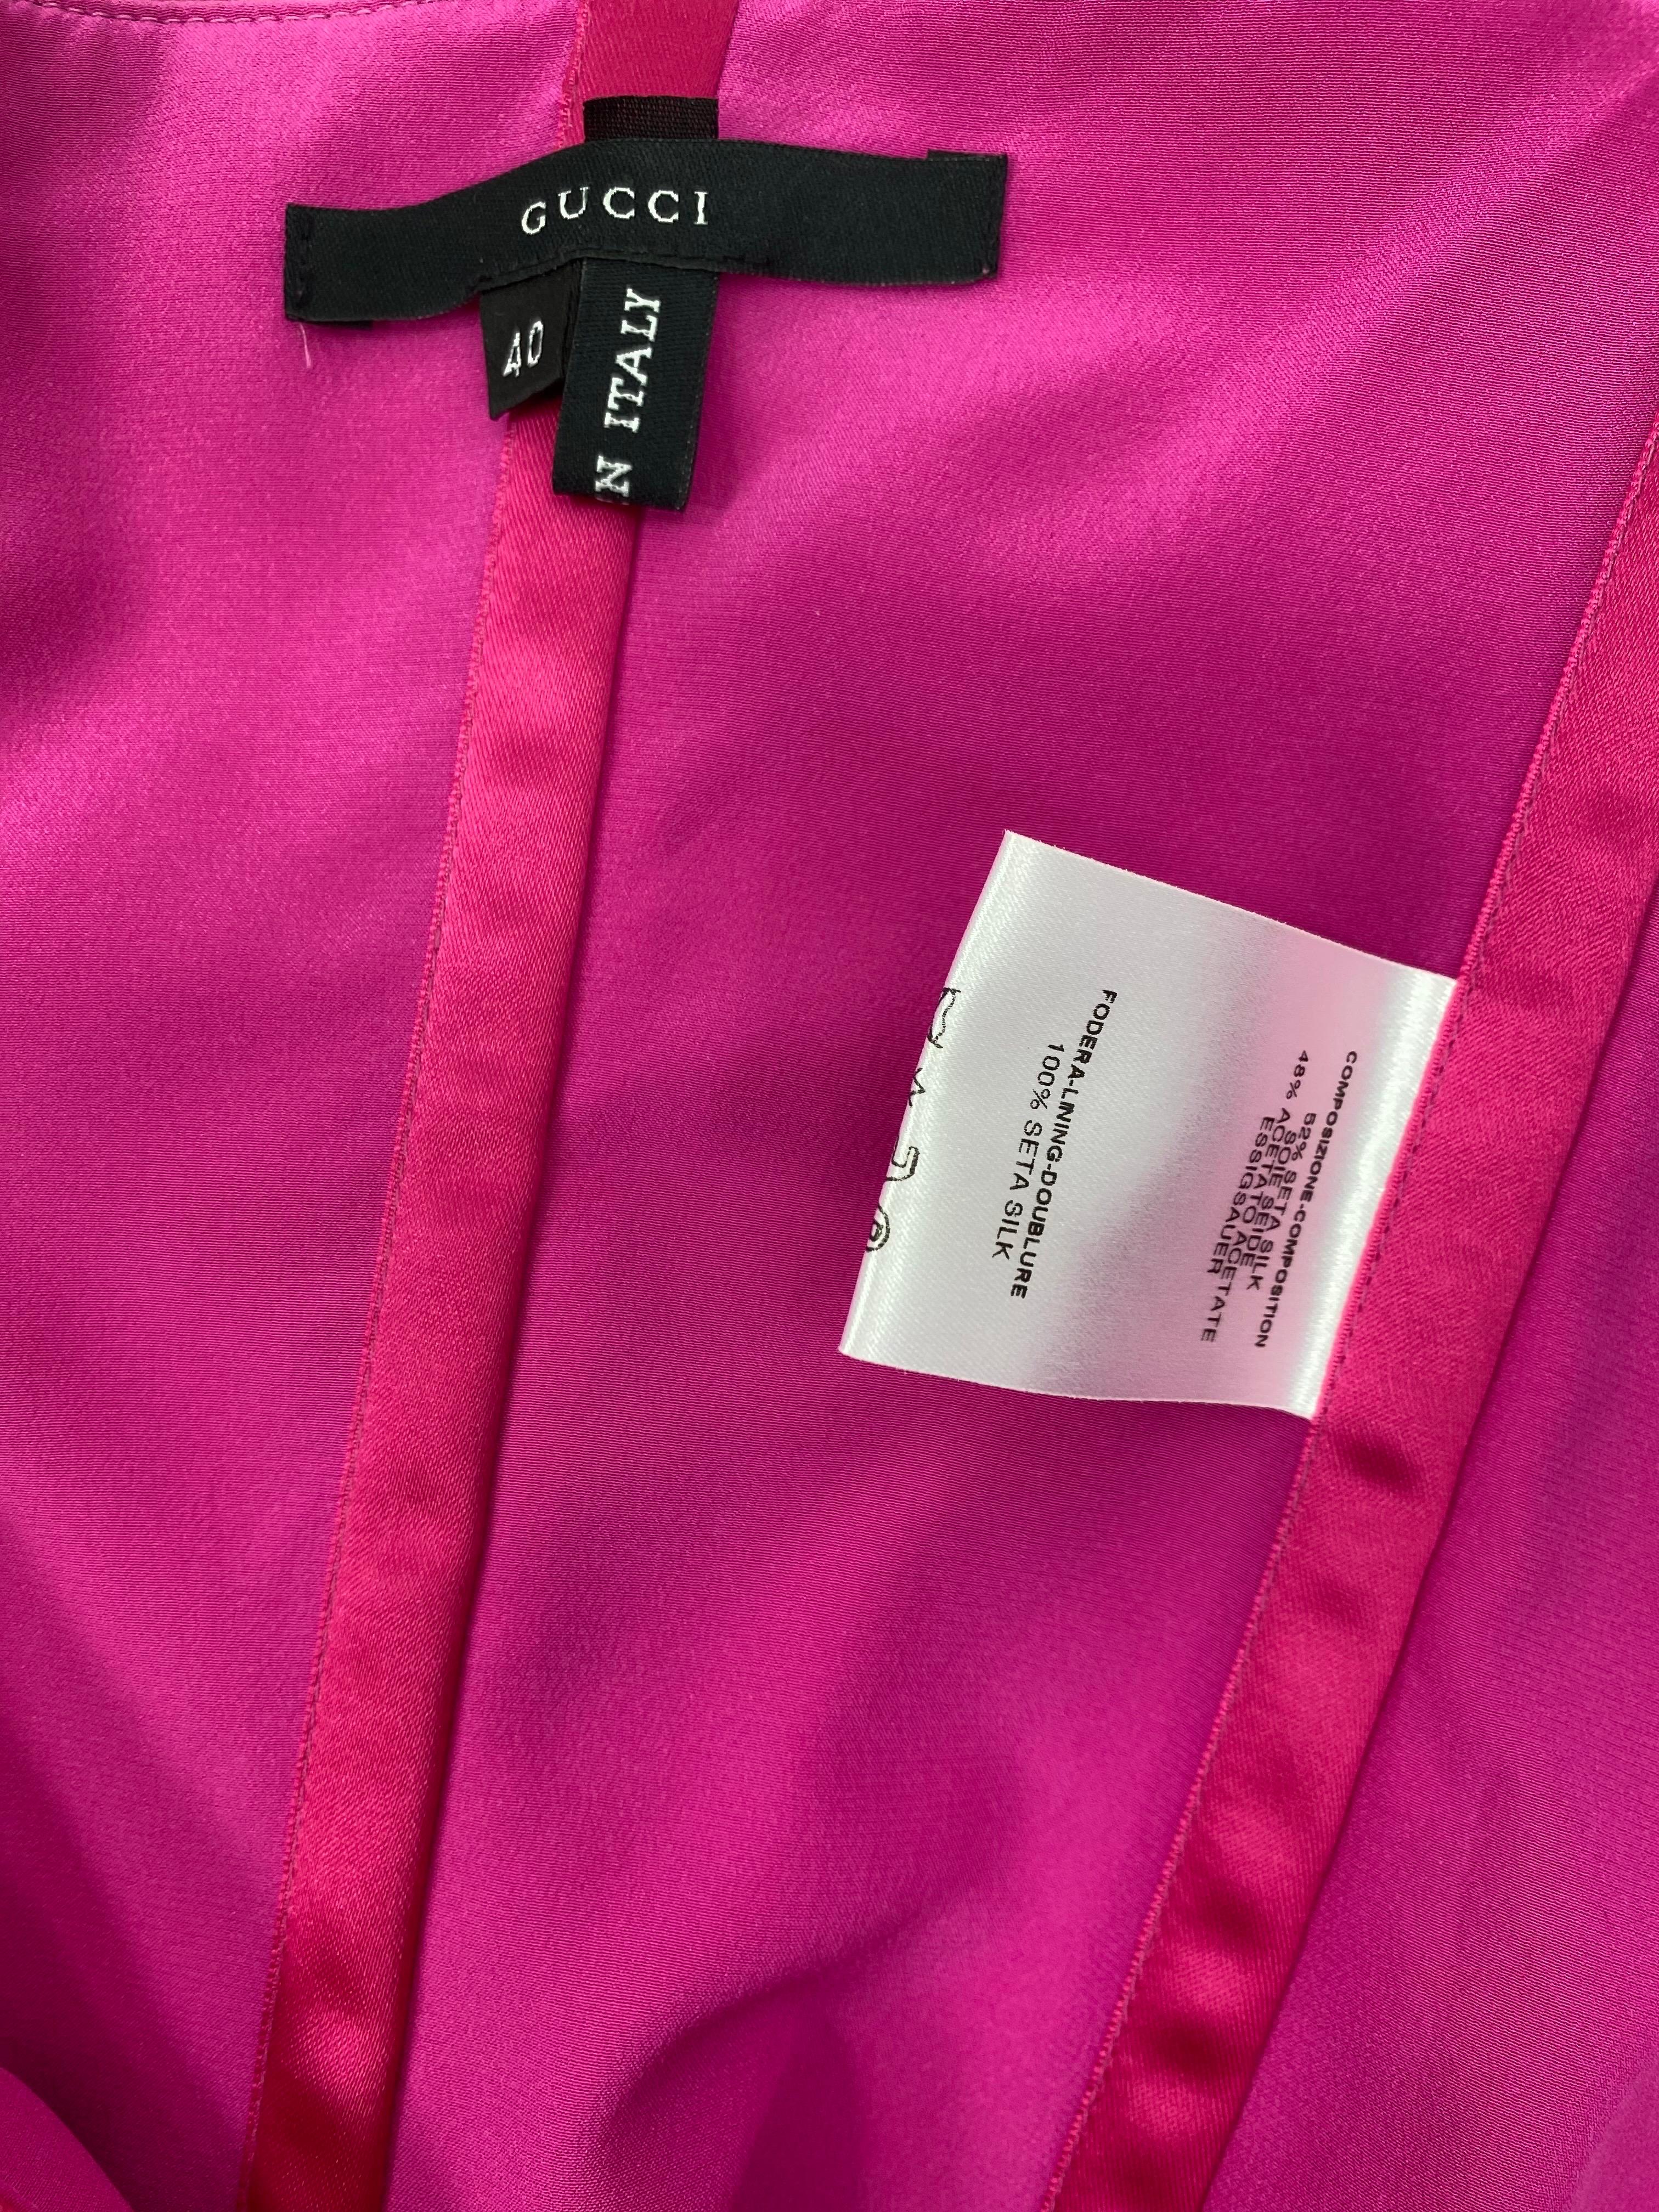 Women's S/S 2001 Vintage Tom Ford for Gucci Hot Pink Strapless Dress For Sale